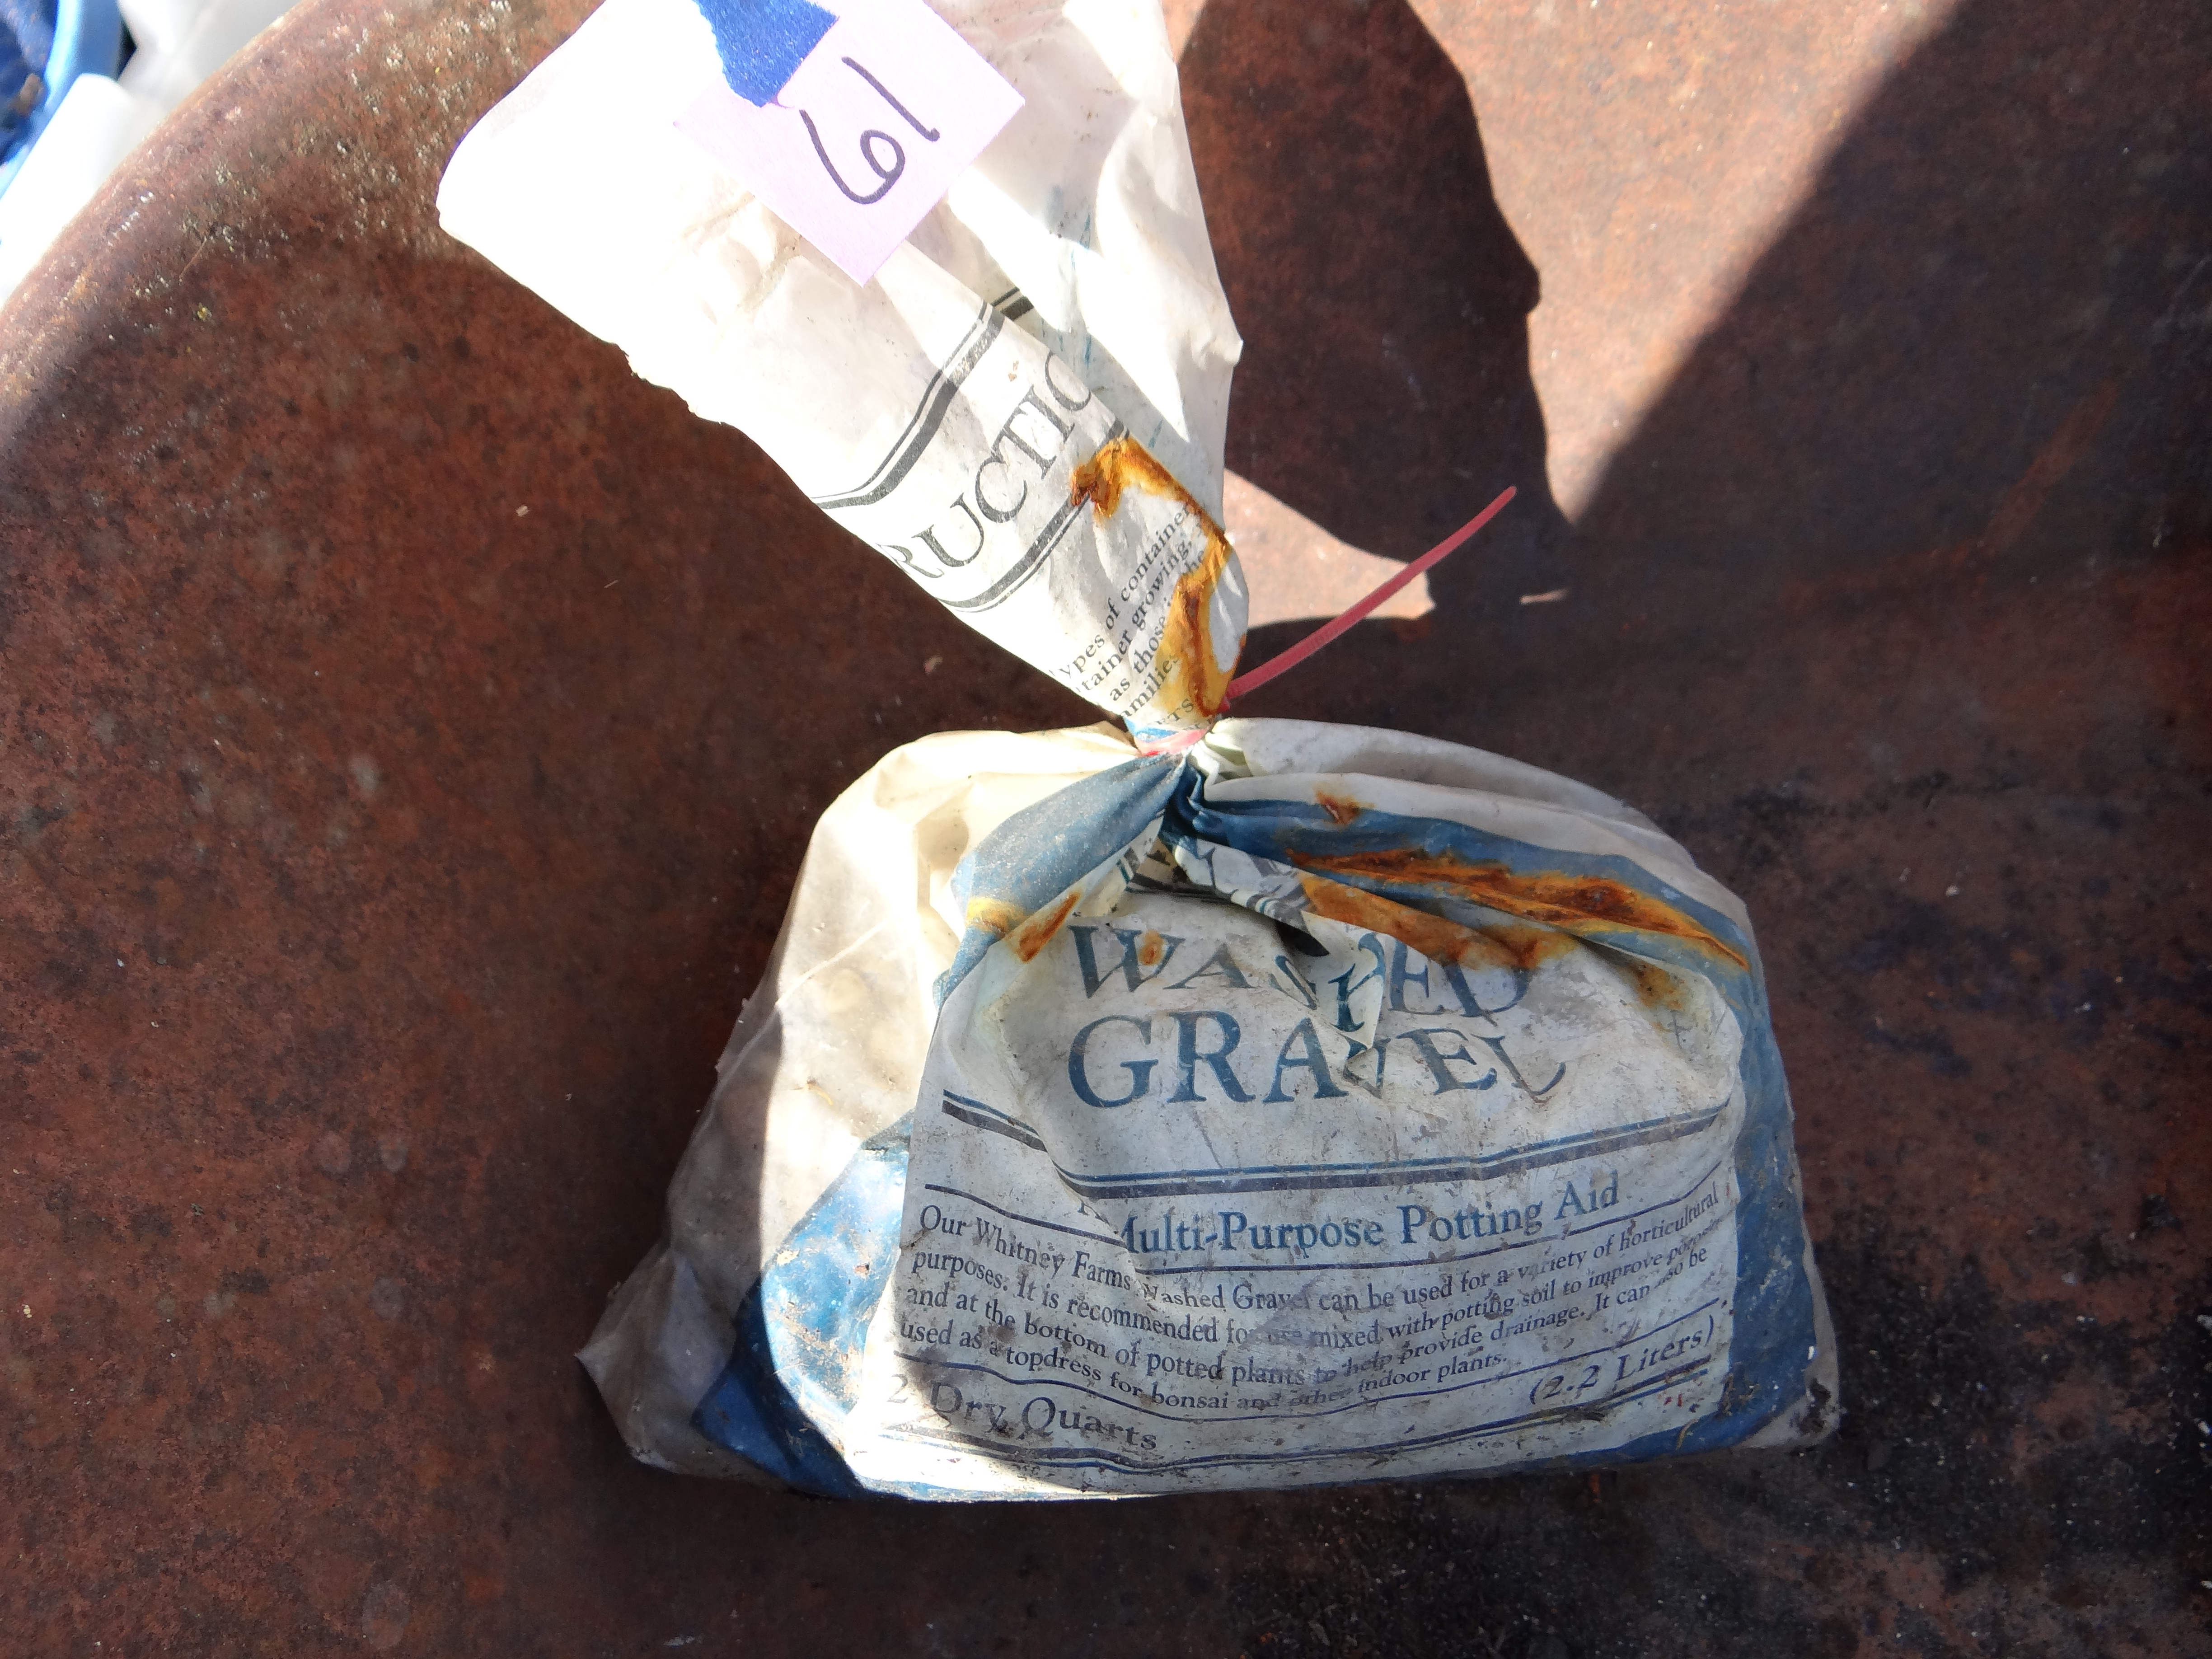 61-Small Bag of Washed Gravel For Potting